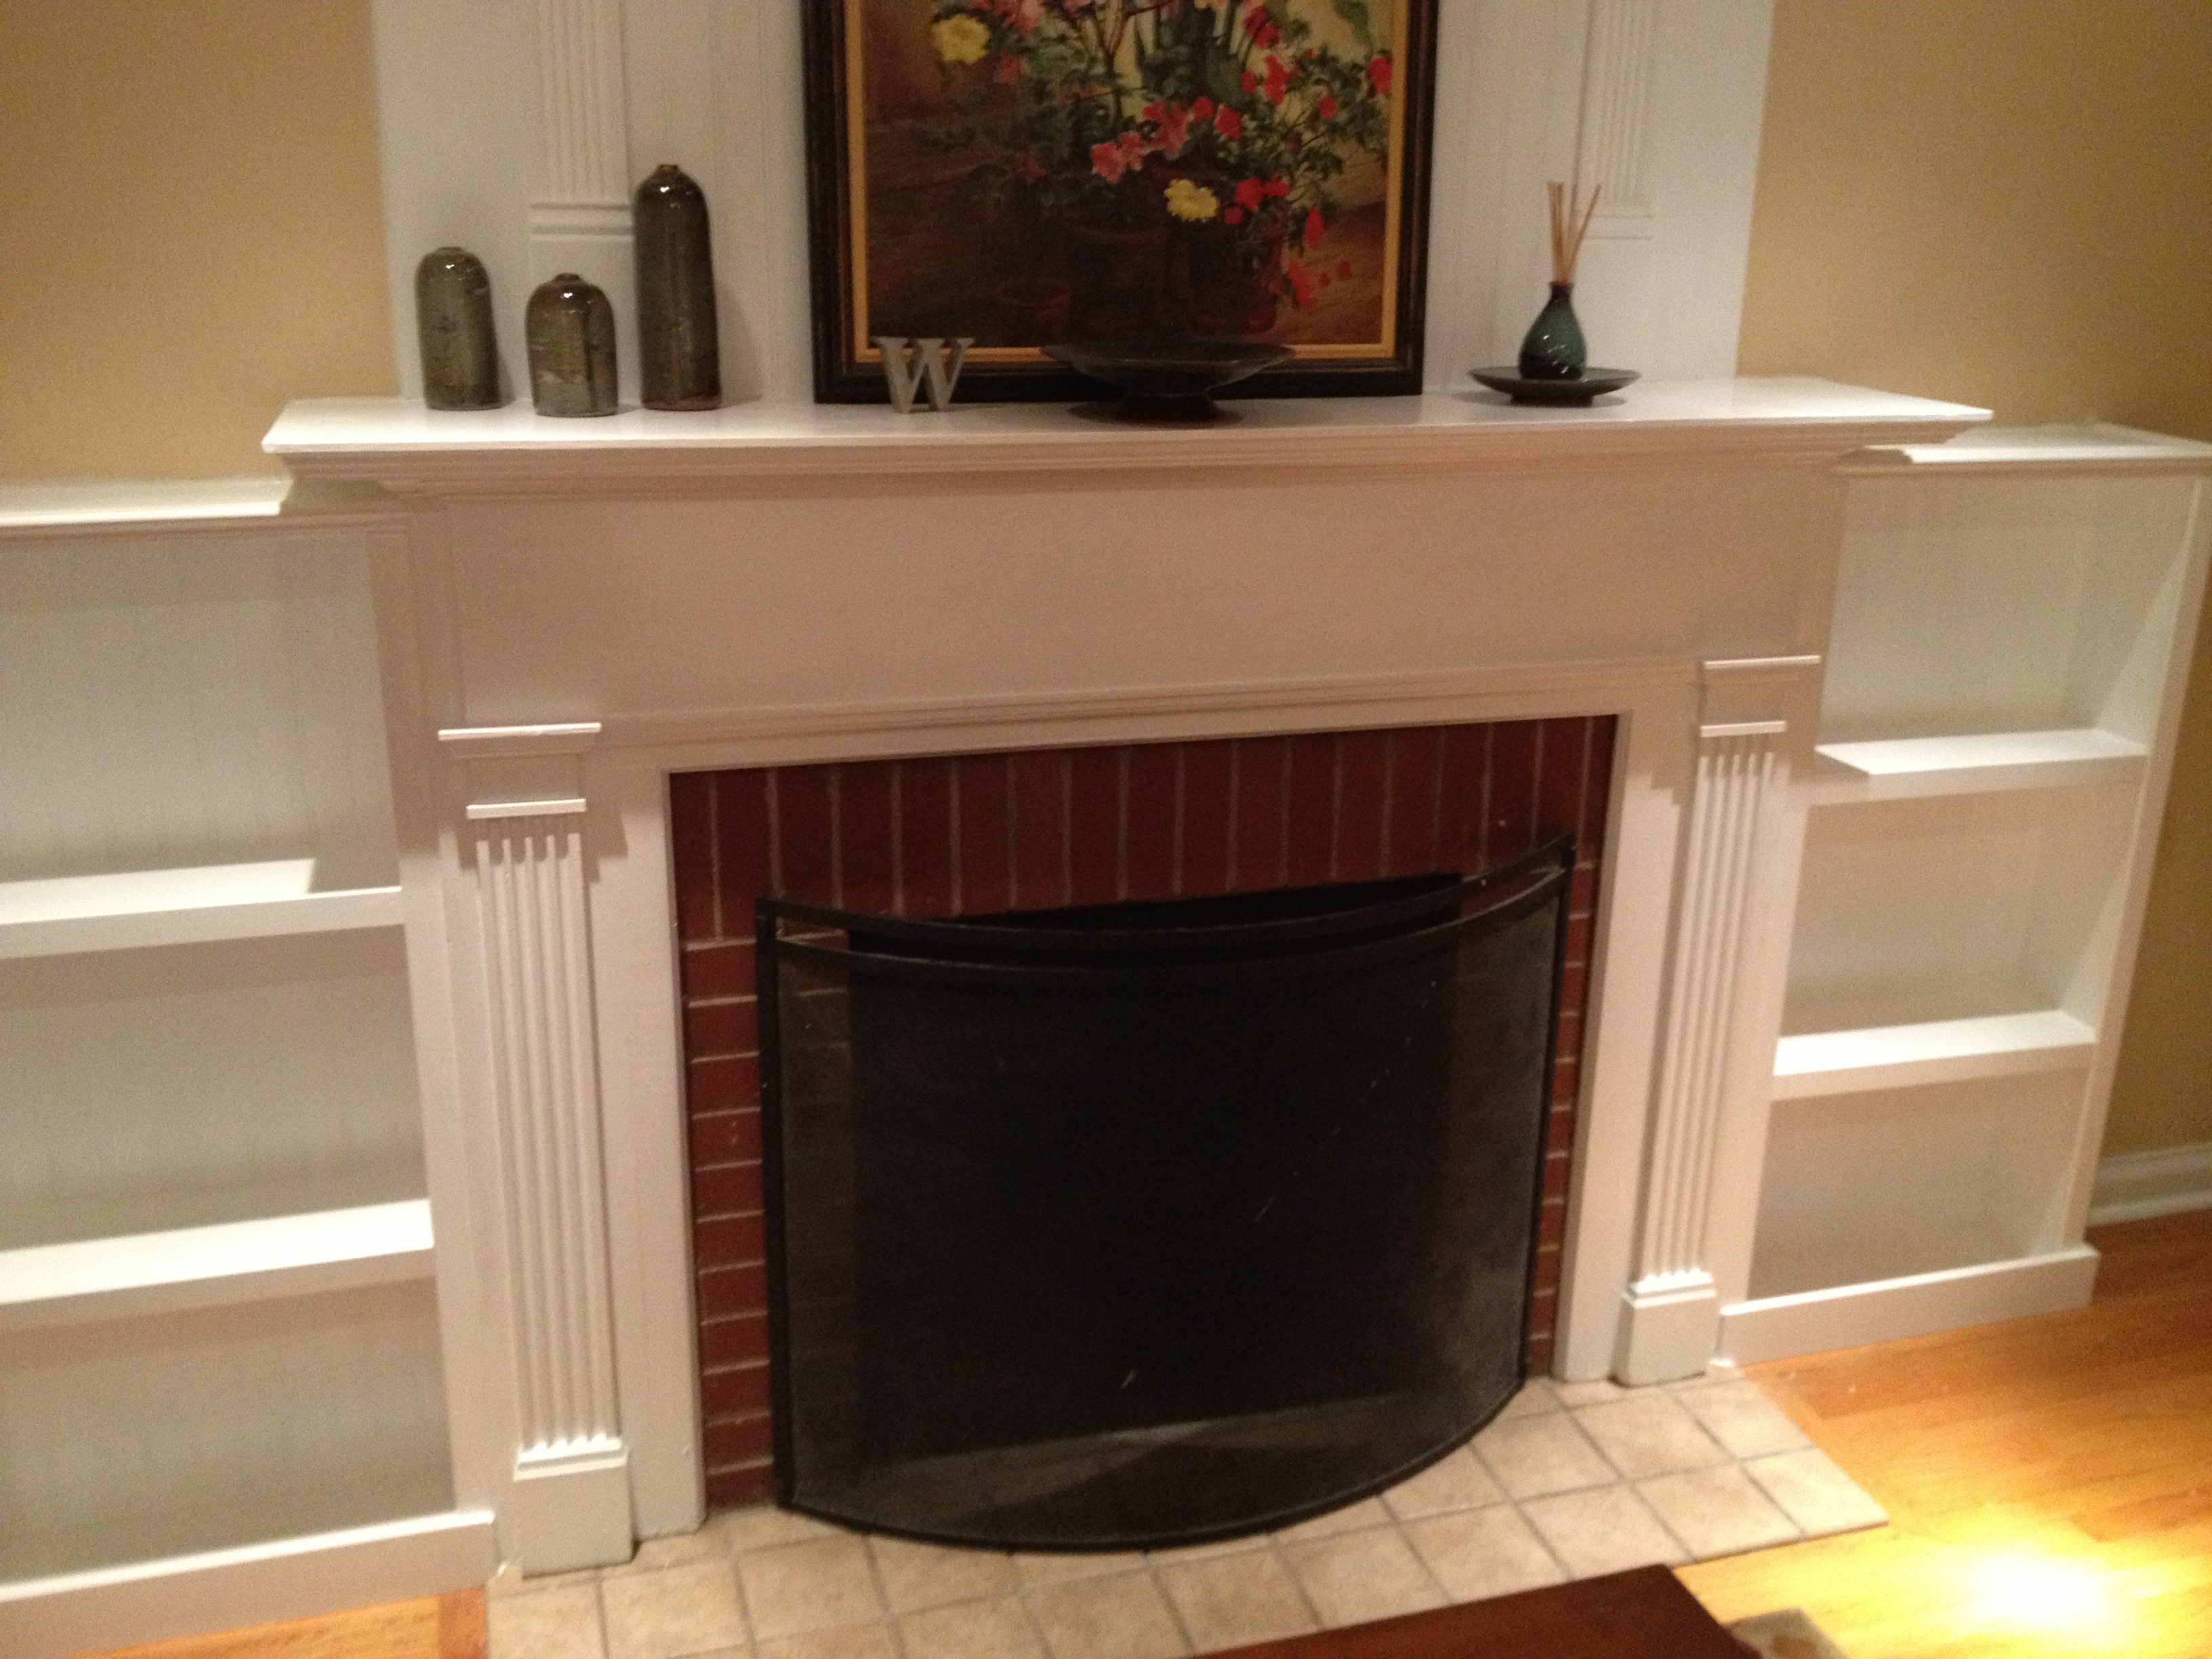 Fireplace Facelift Built In Bookcases, How To Build Built In Bookcases Around Fireplace